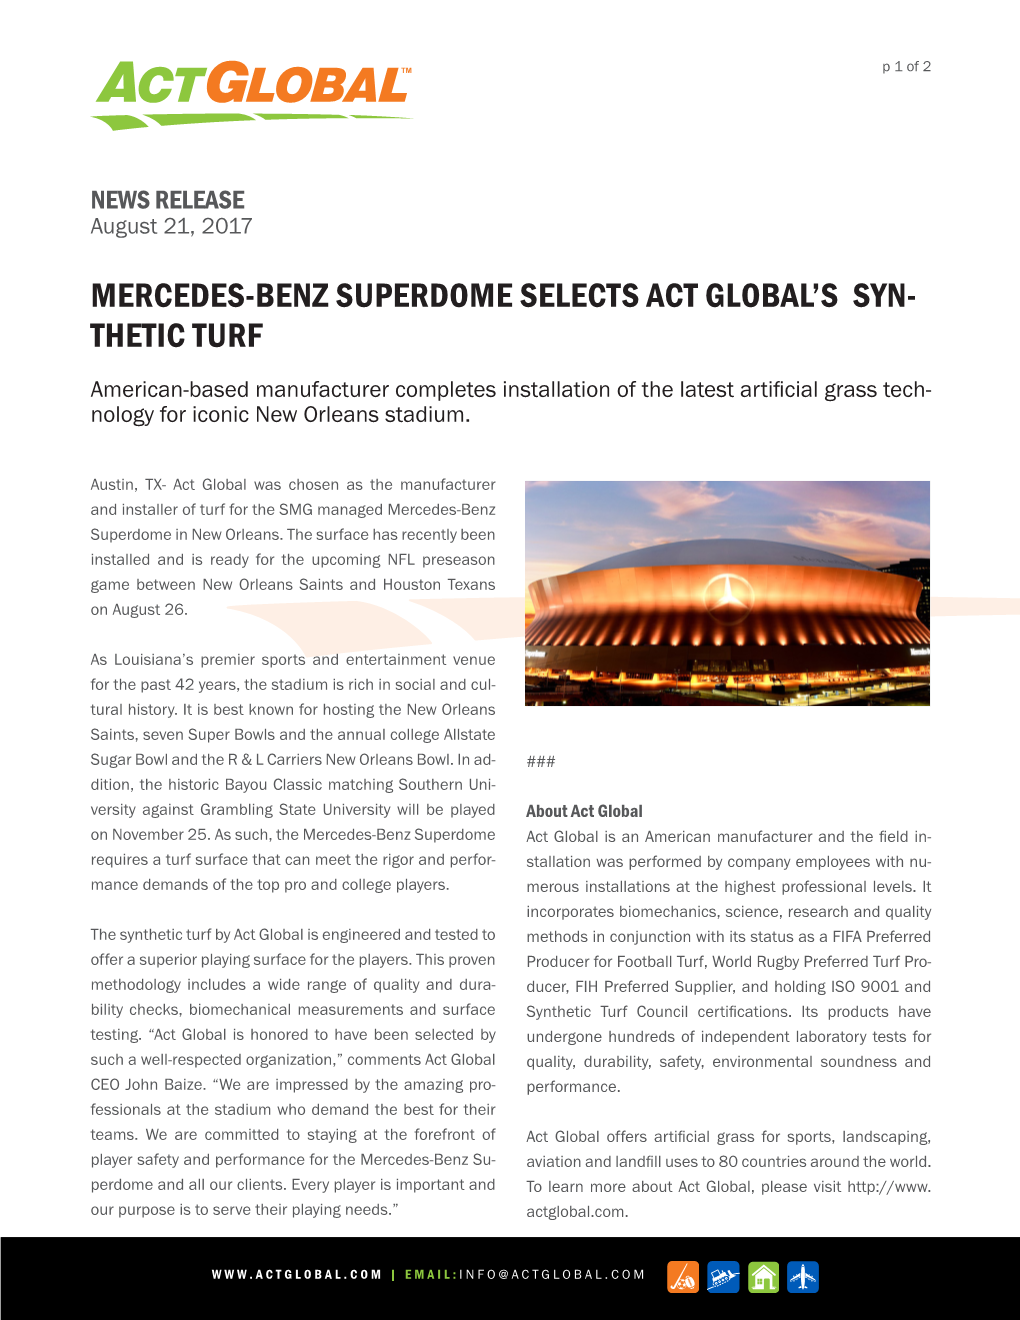 Mercedes-Benz Superdome Selects Act Global's Syn